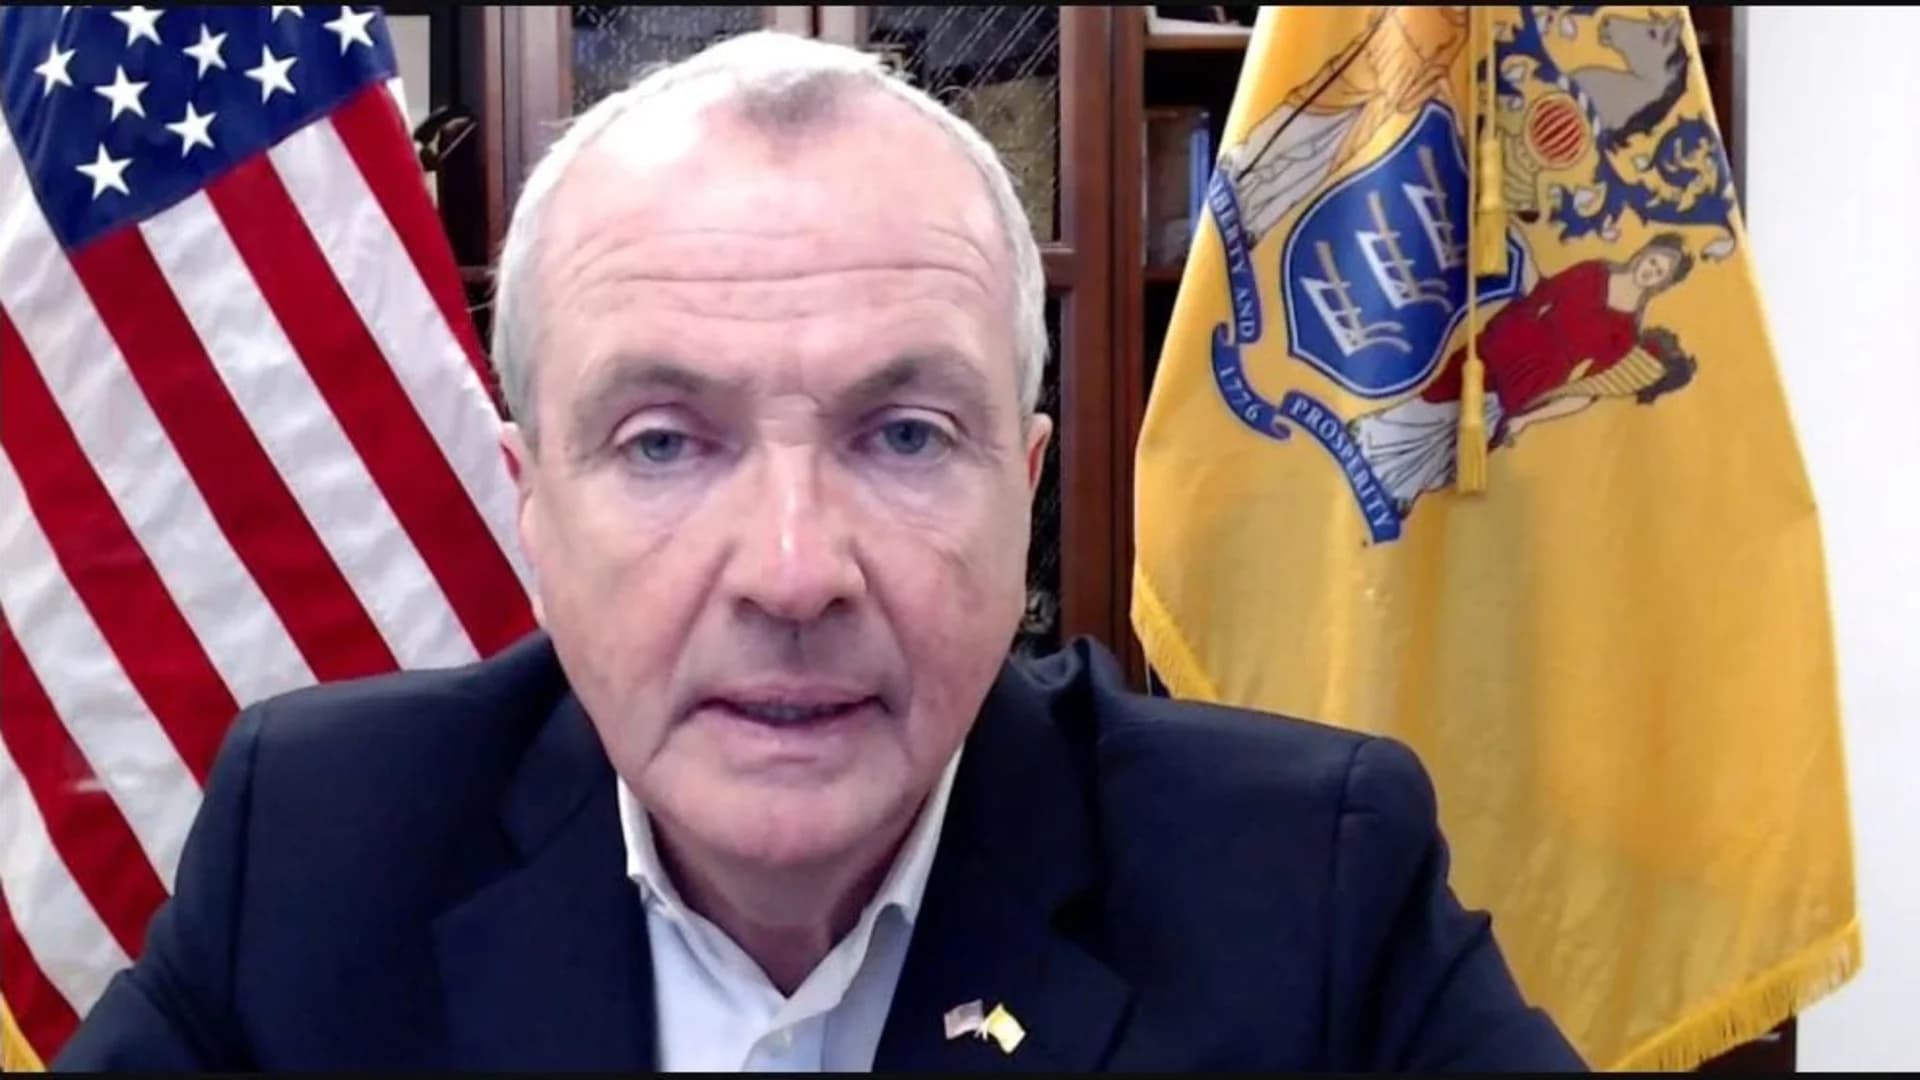 Ask Gov. Murphy: COVID-19 Edition - March 31, 2020